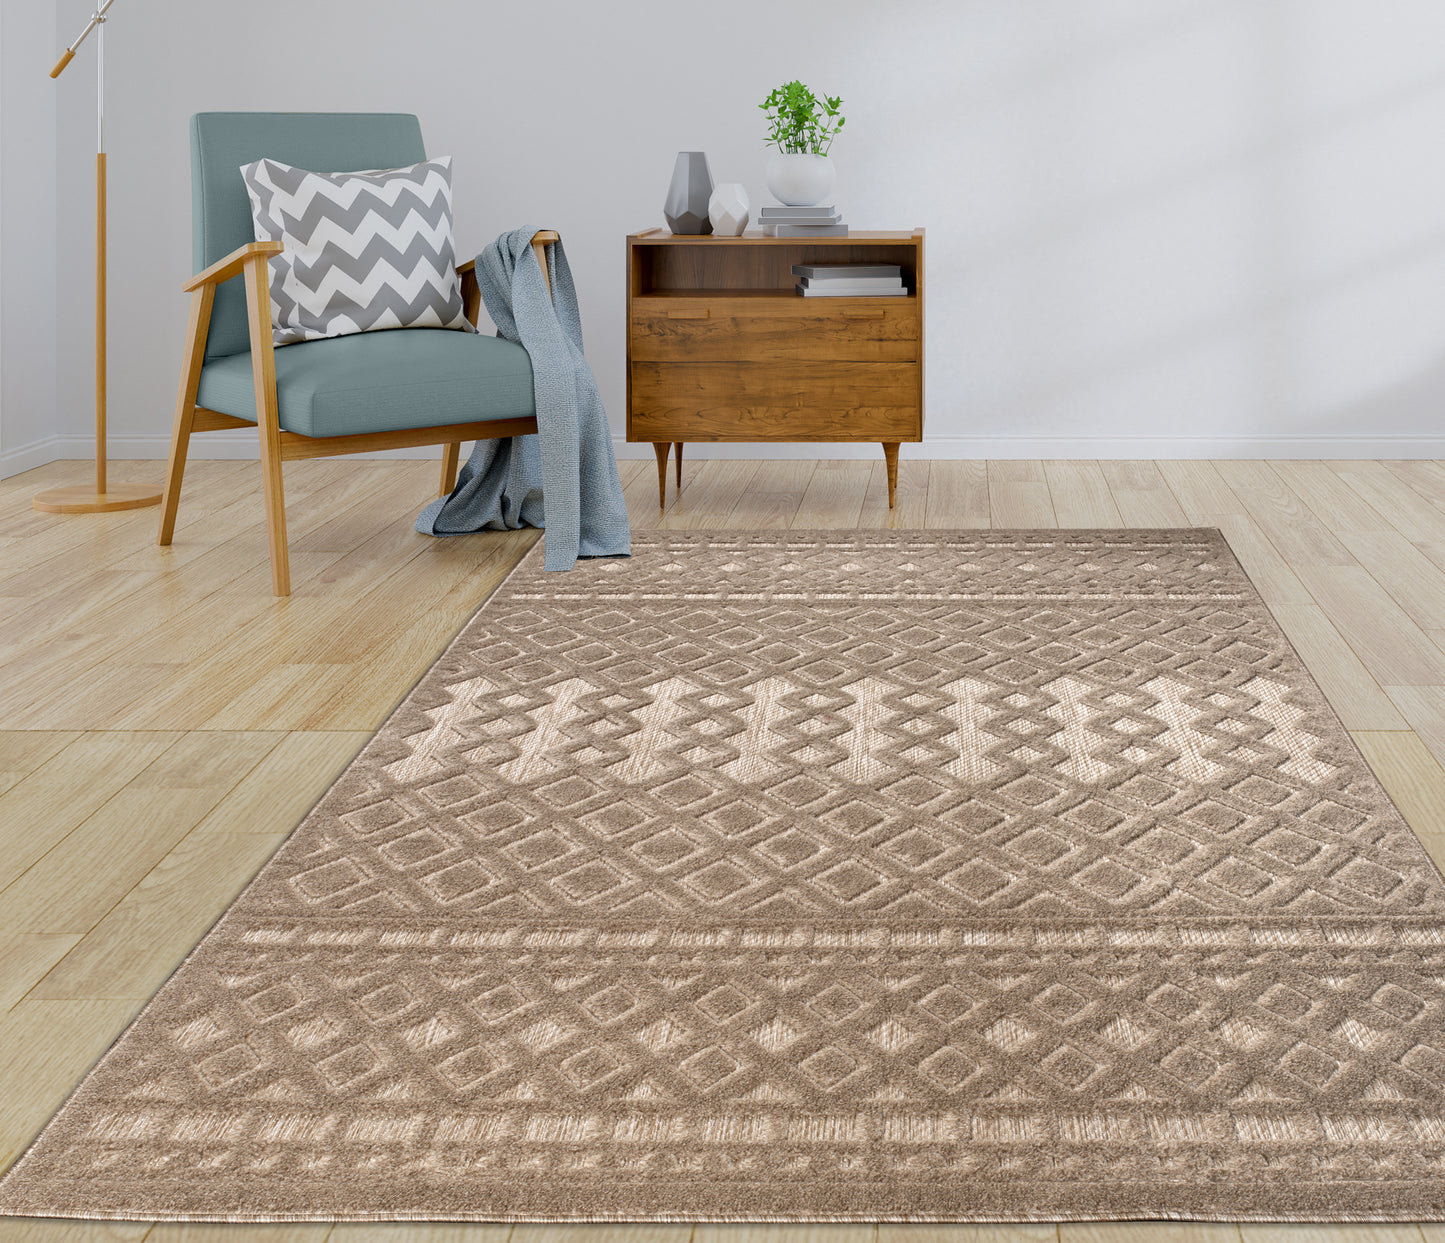 LaDole Rugs Geometric Modern Contemporary Area Rug - Durable Premium Carpet for Living Room, Bedroom, Office, Entrance, and Hallway - Brown, and Cream Beige